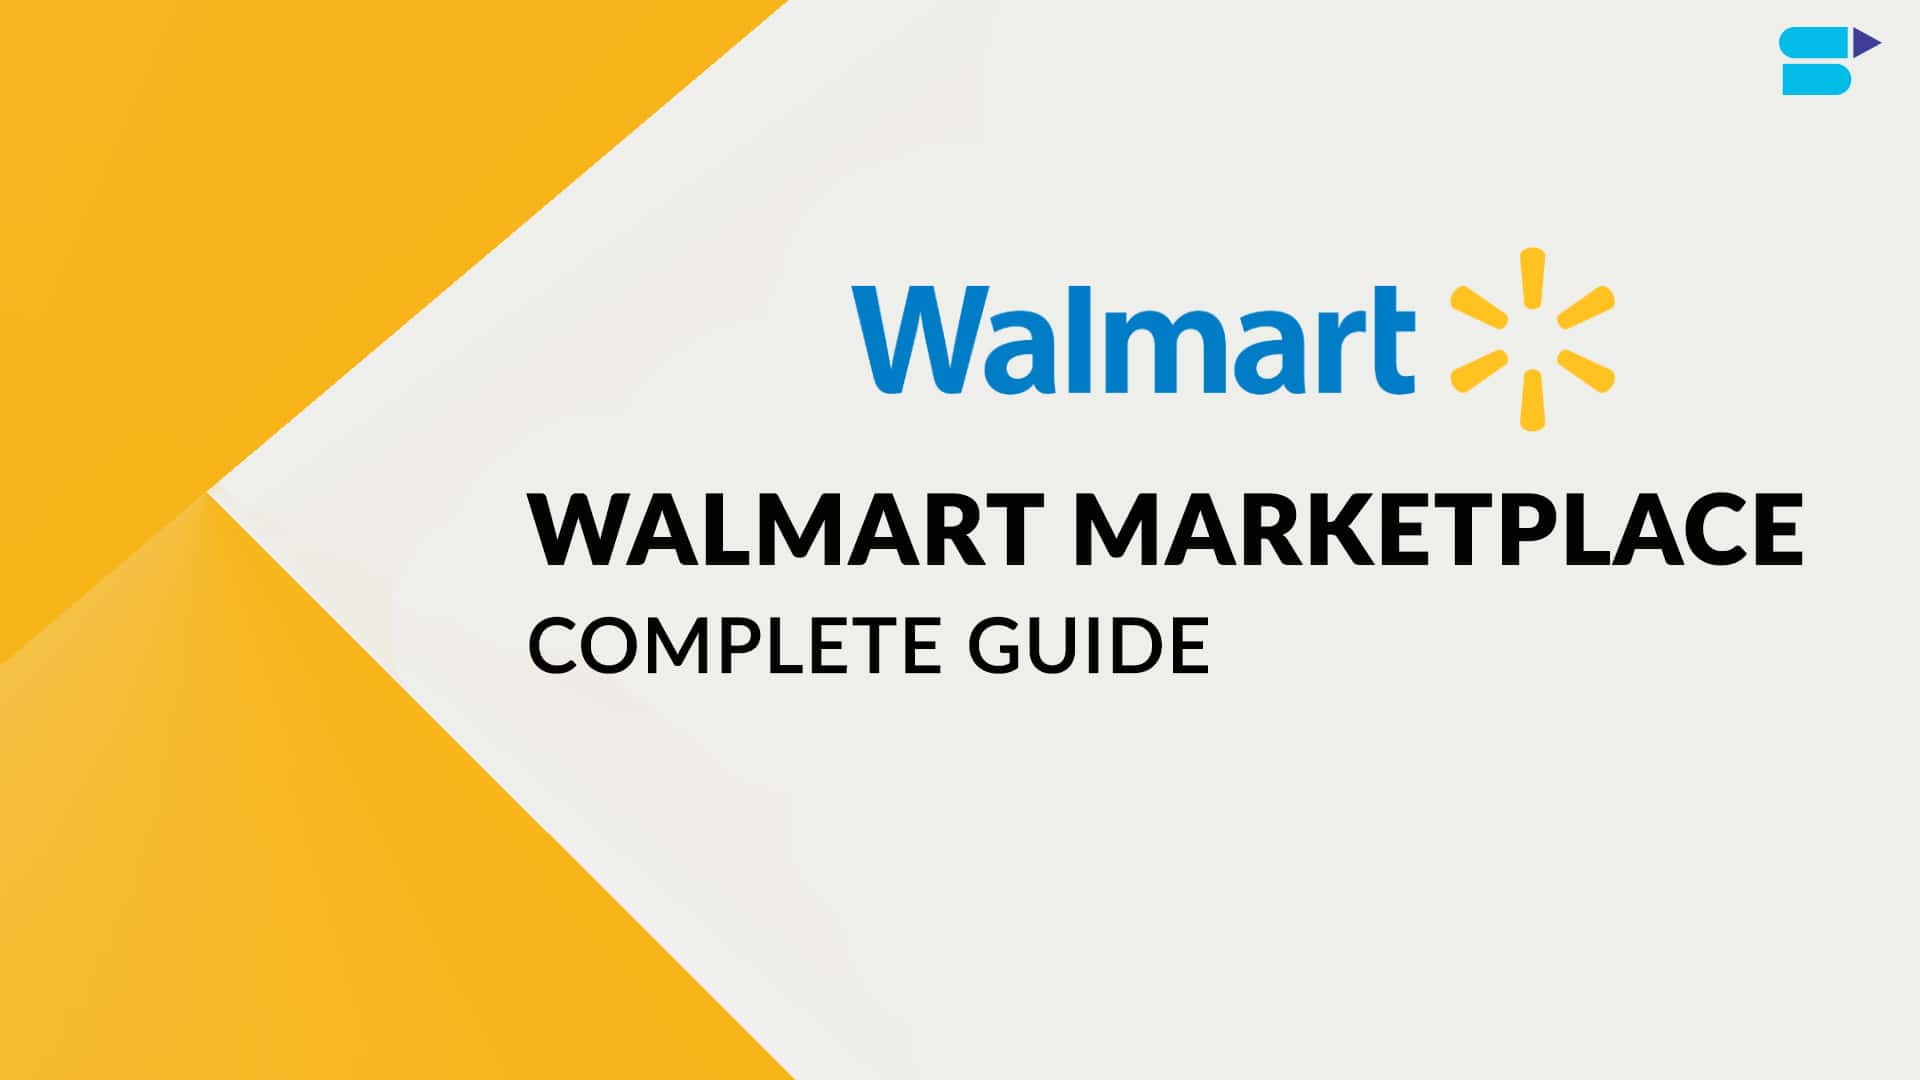 Walmart's marketplace items get free 2-day shipping, in-store